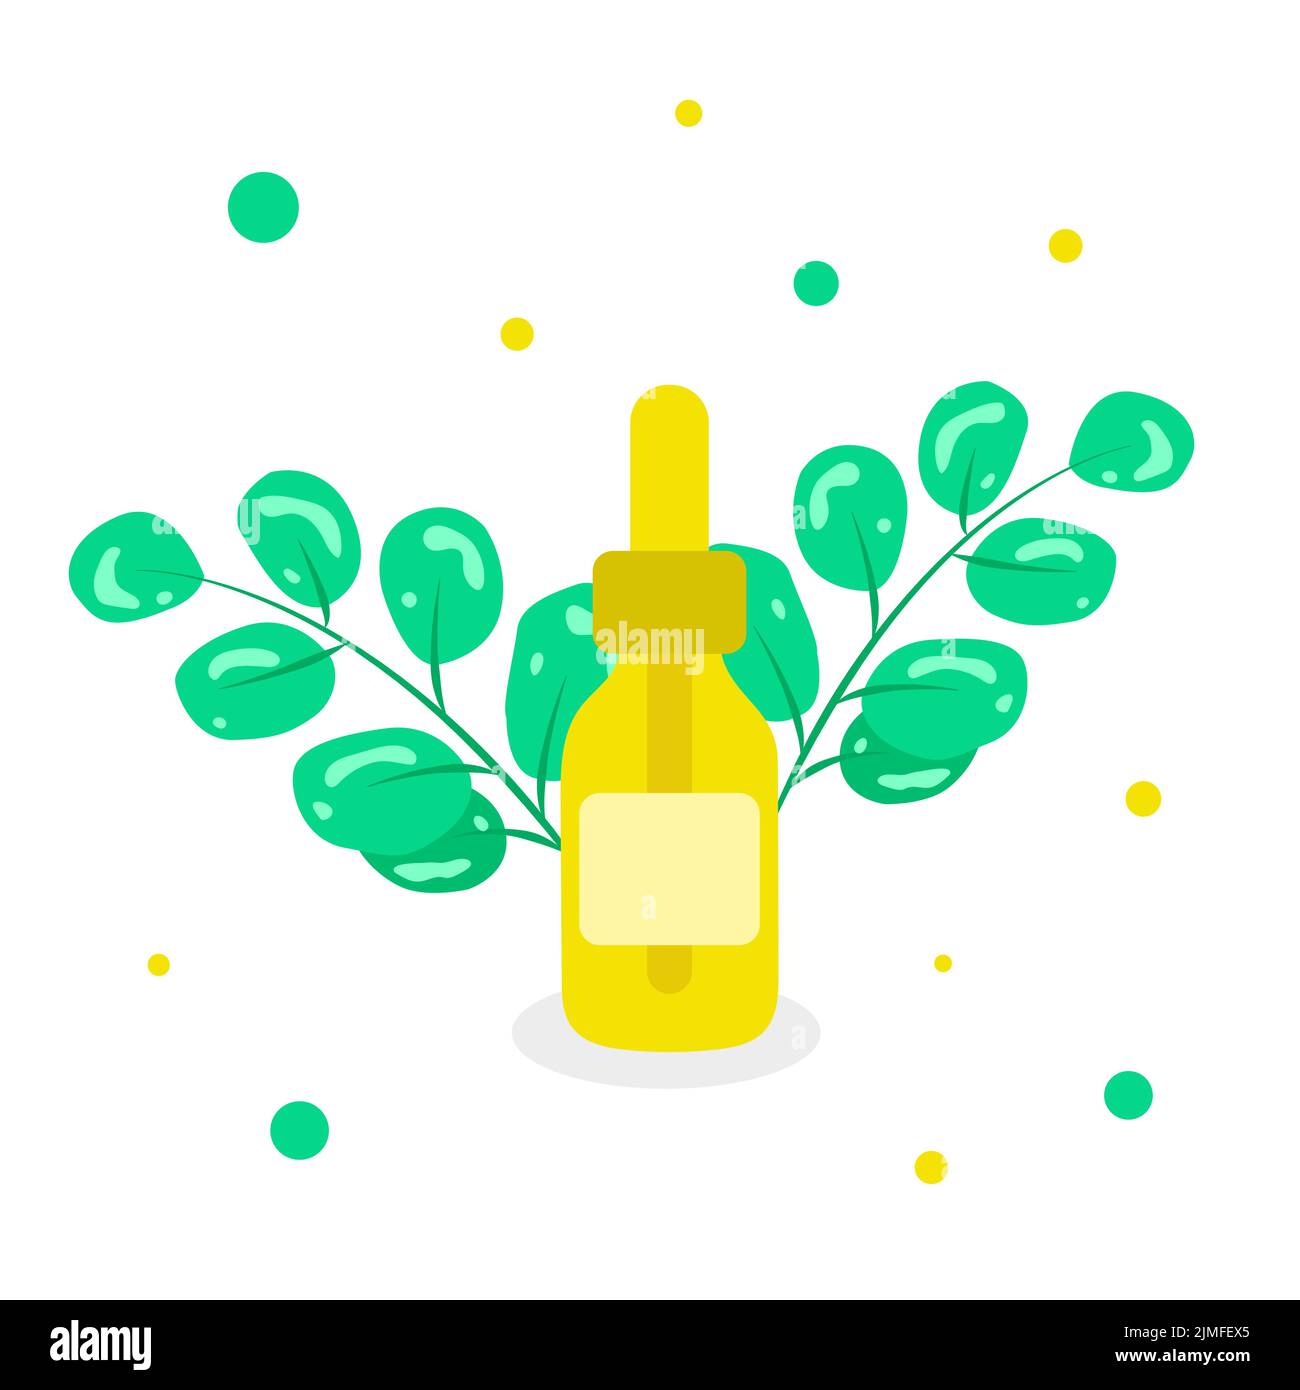 Organic Natural Herbal Cosmetics Essential Oil Cosmetics Eco Friendly Product Skin Care Body and Face Skin Care Hair and Nails Stock Vector